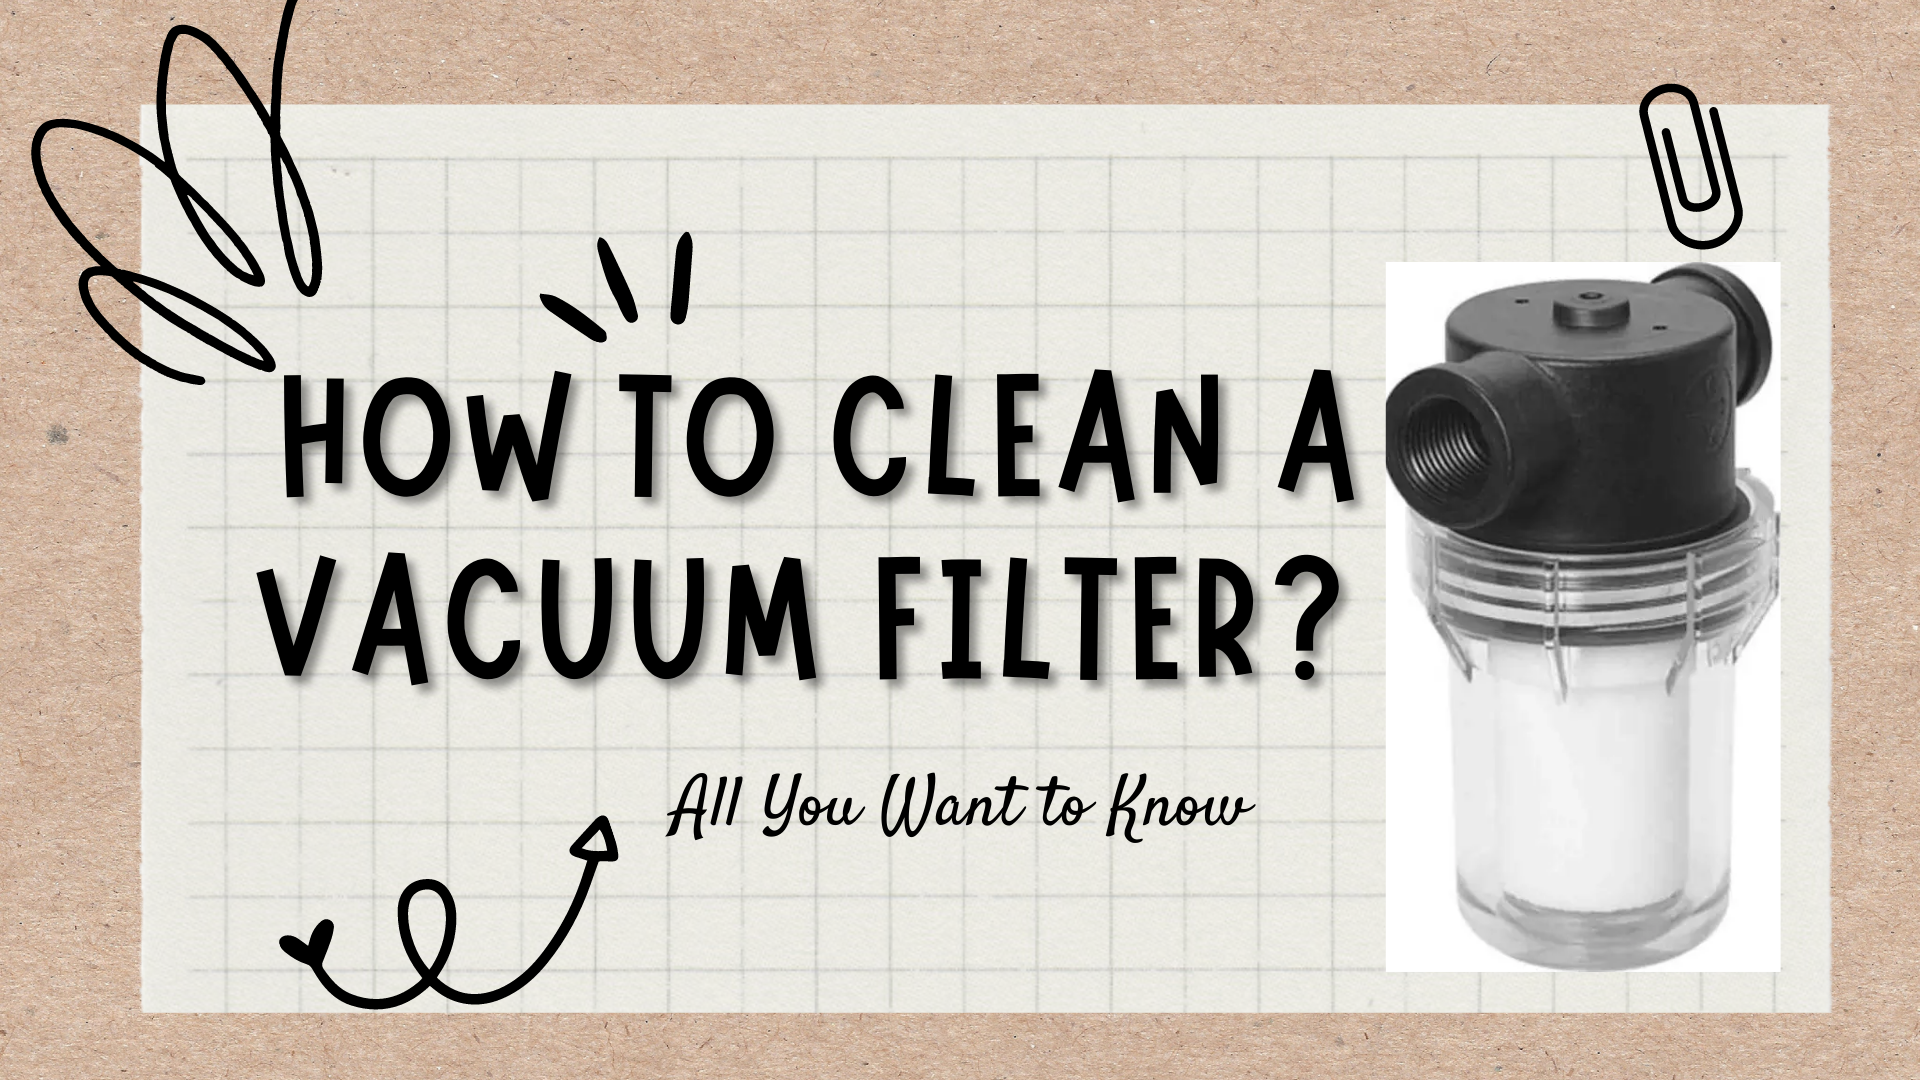 How to Clean a Vacuum Filter? All You Want to Know